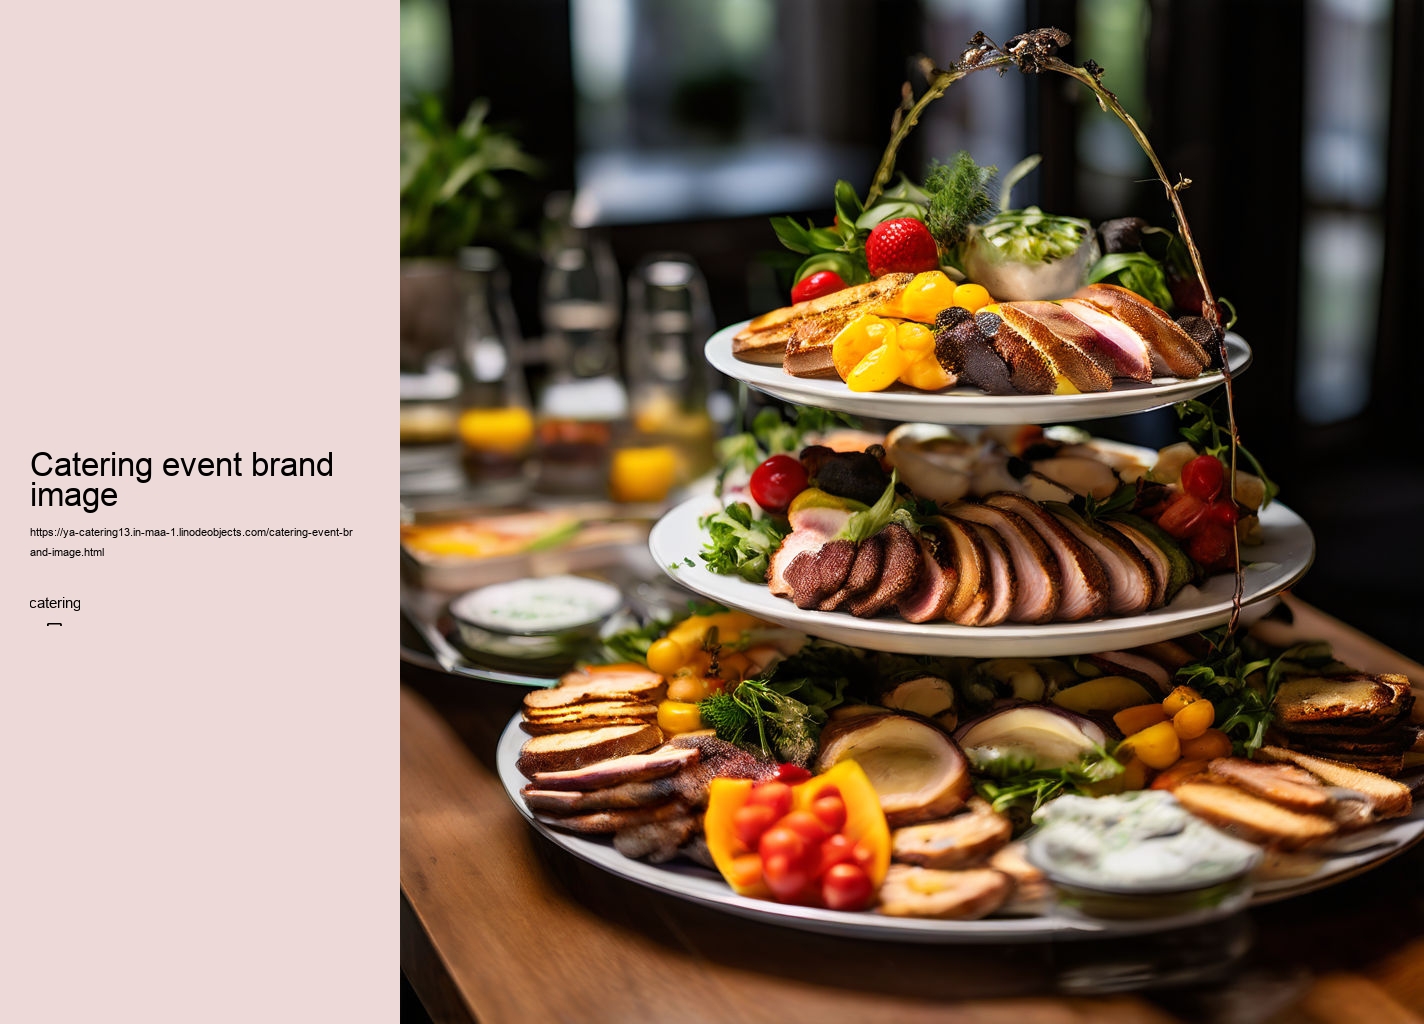 Catering event brand image